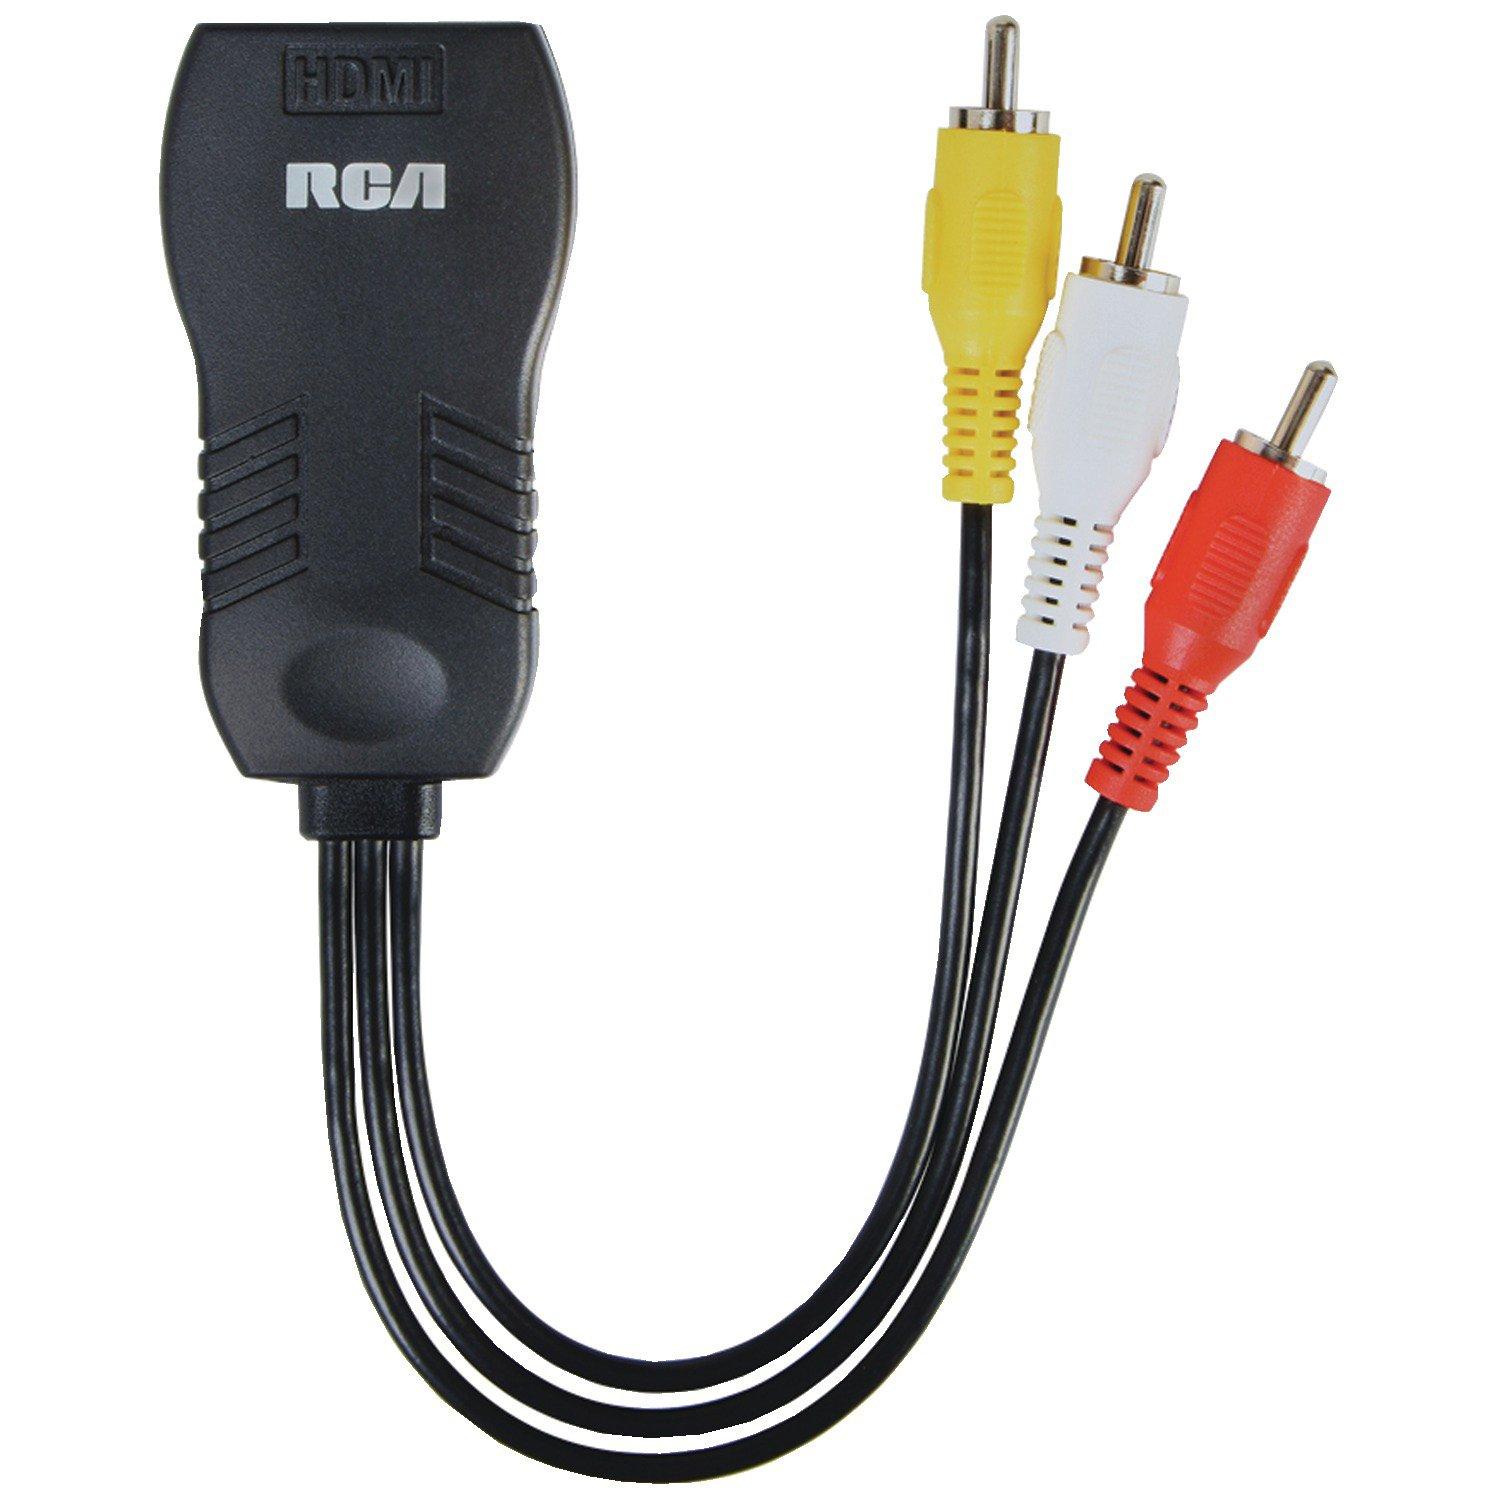 RCA Digital Plus HDMI to Composite Video Adapter |